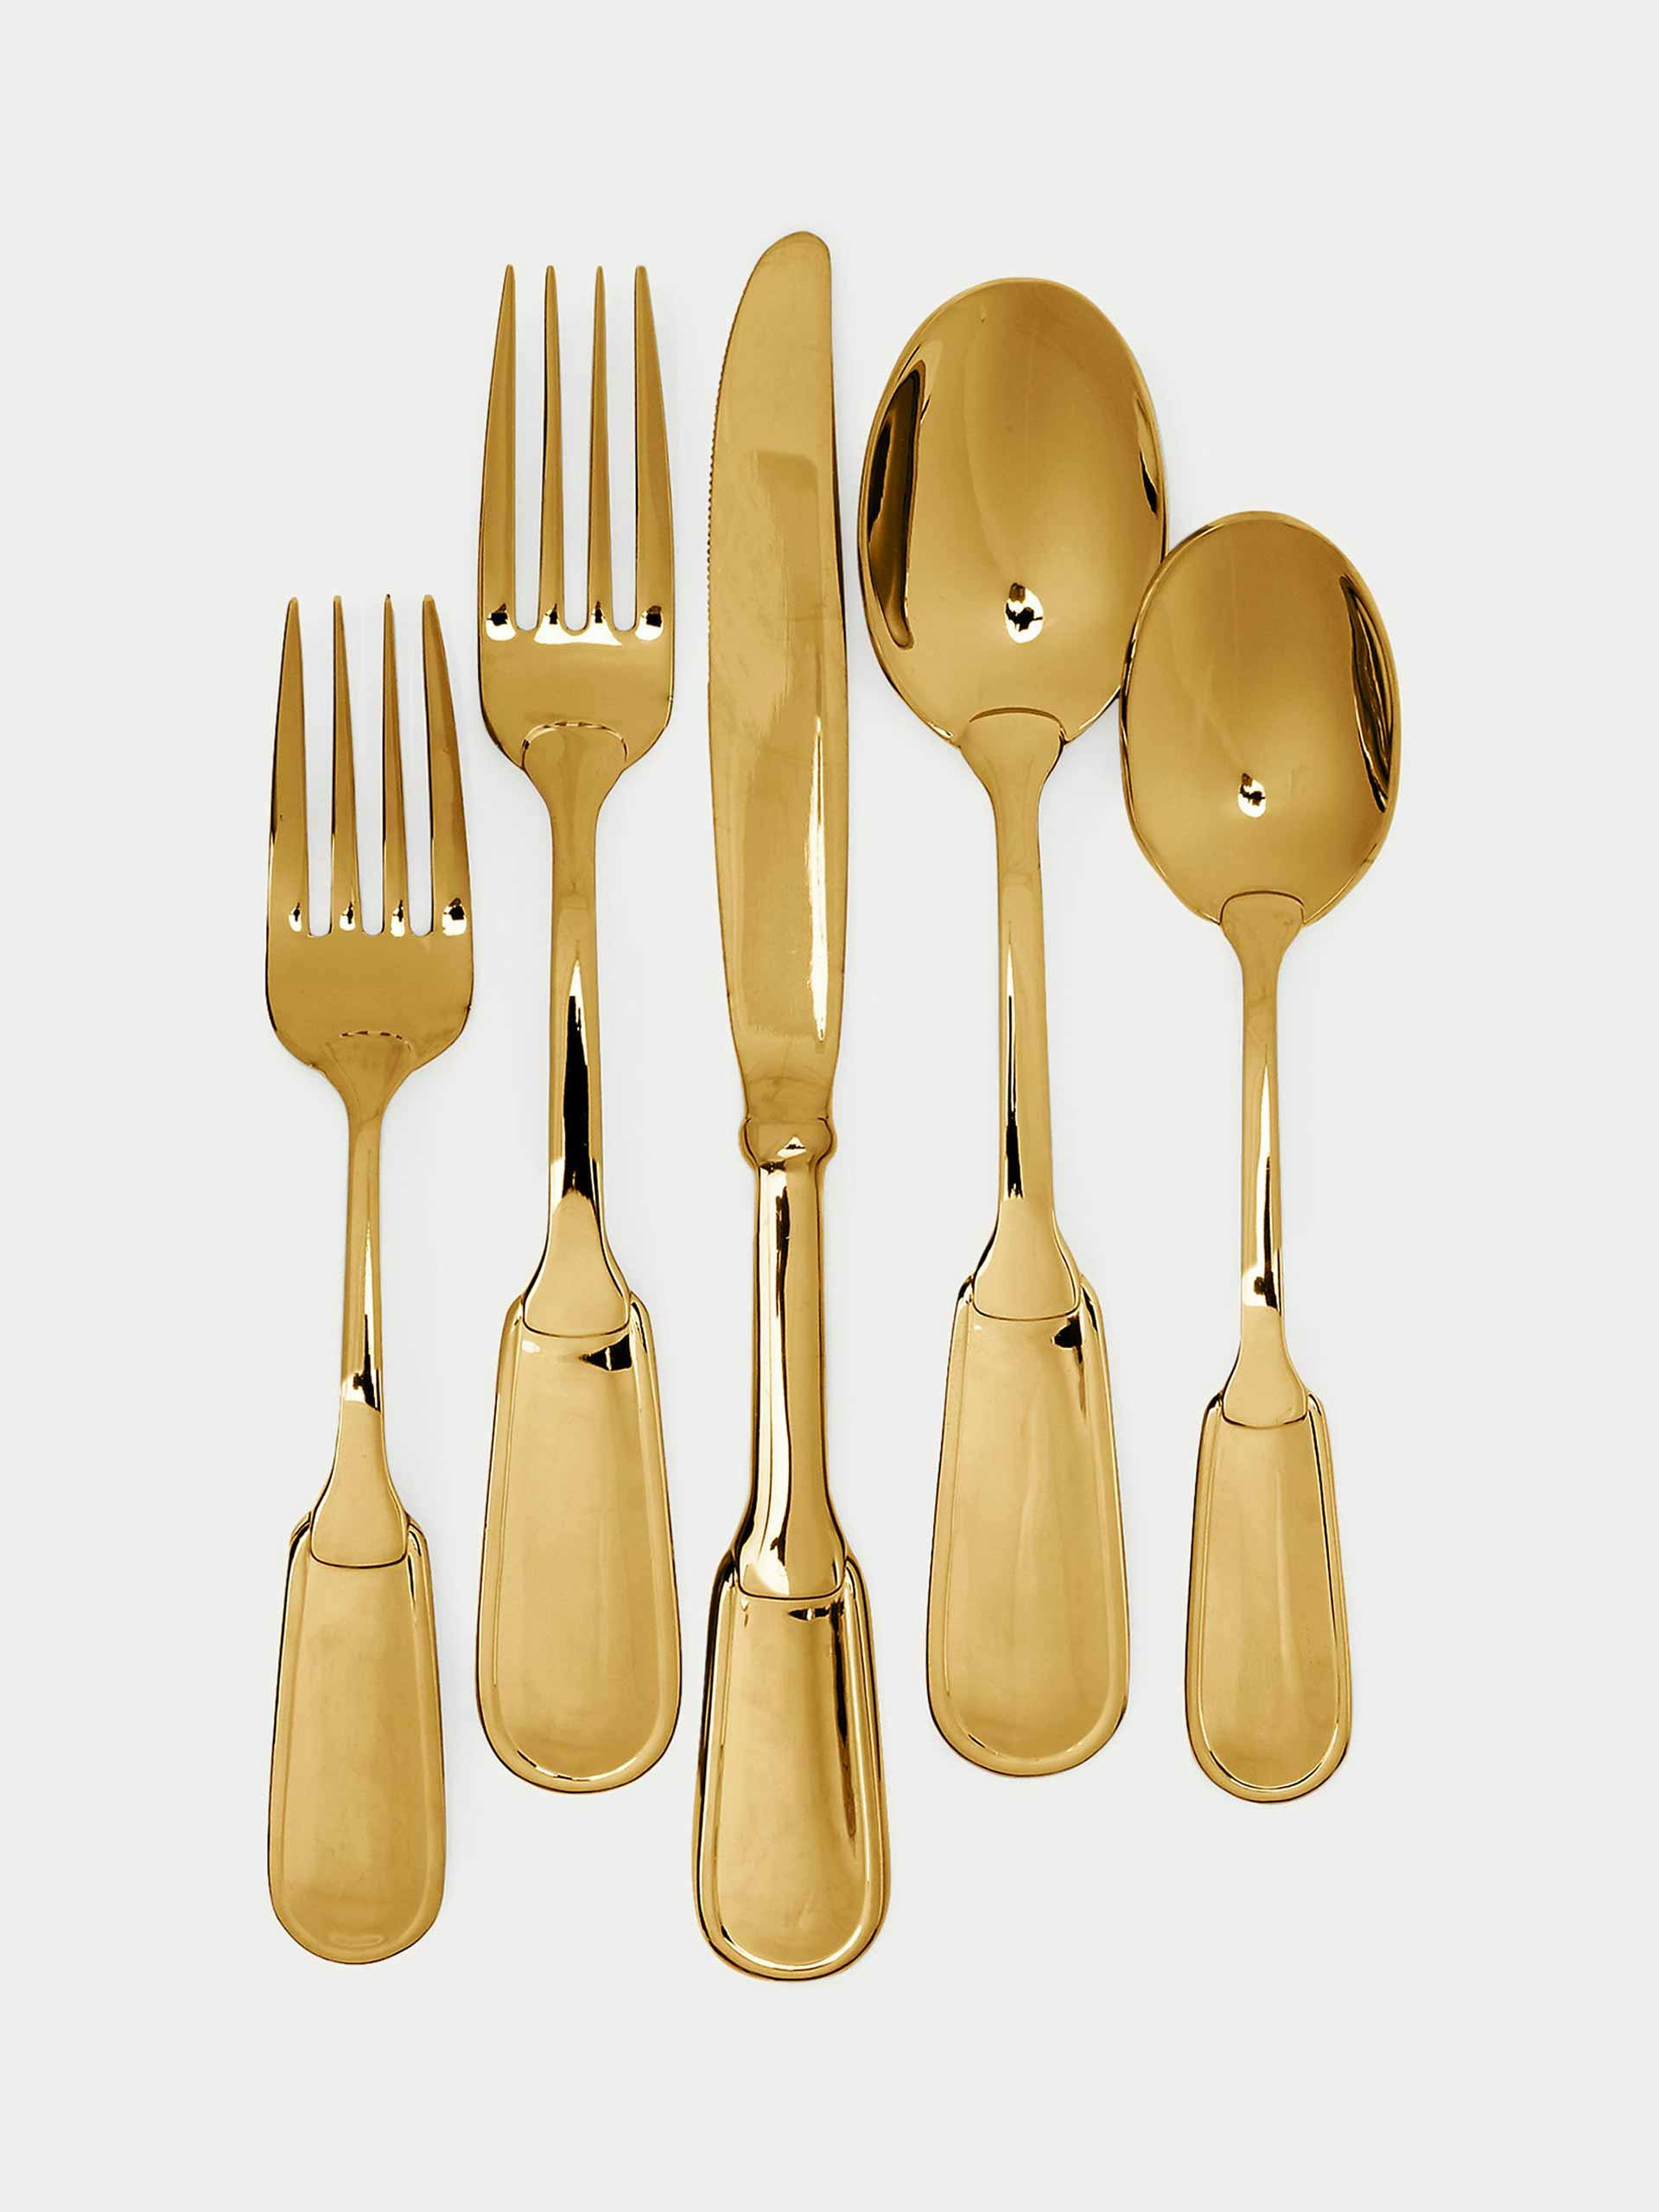 Wentworth gold 5-piece place setting